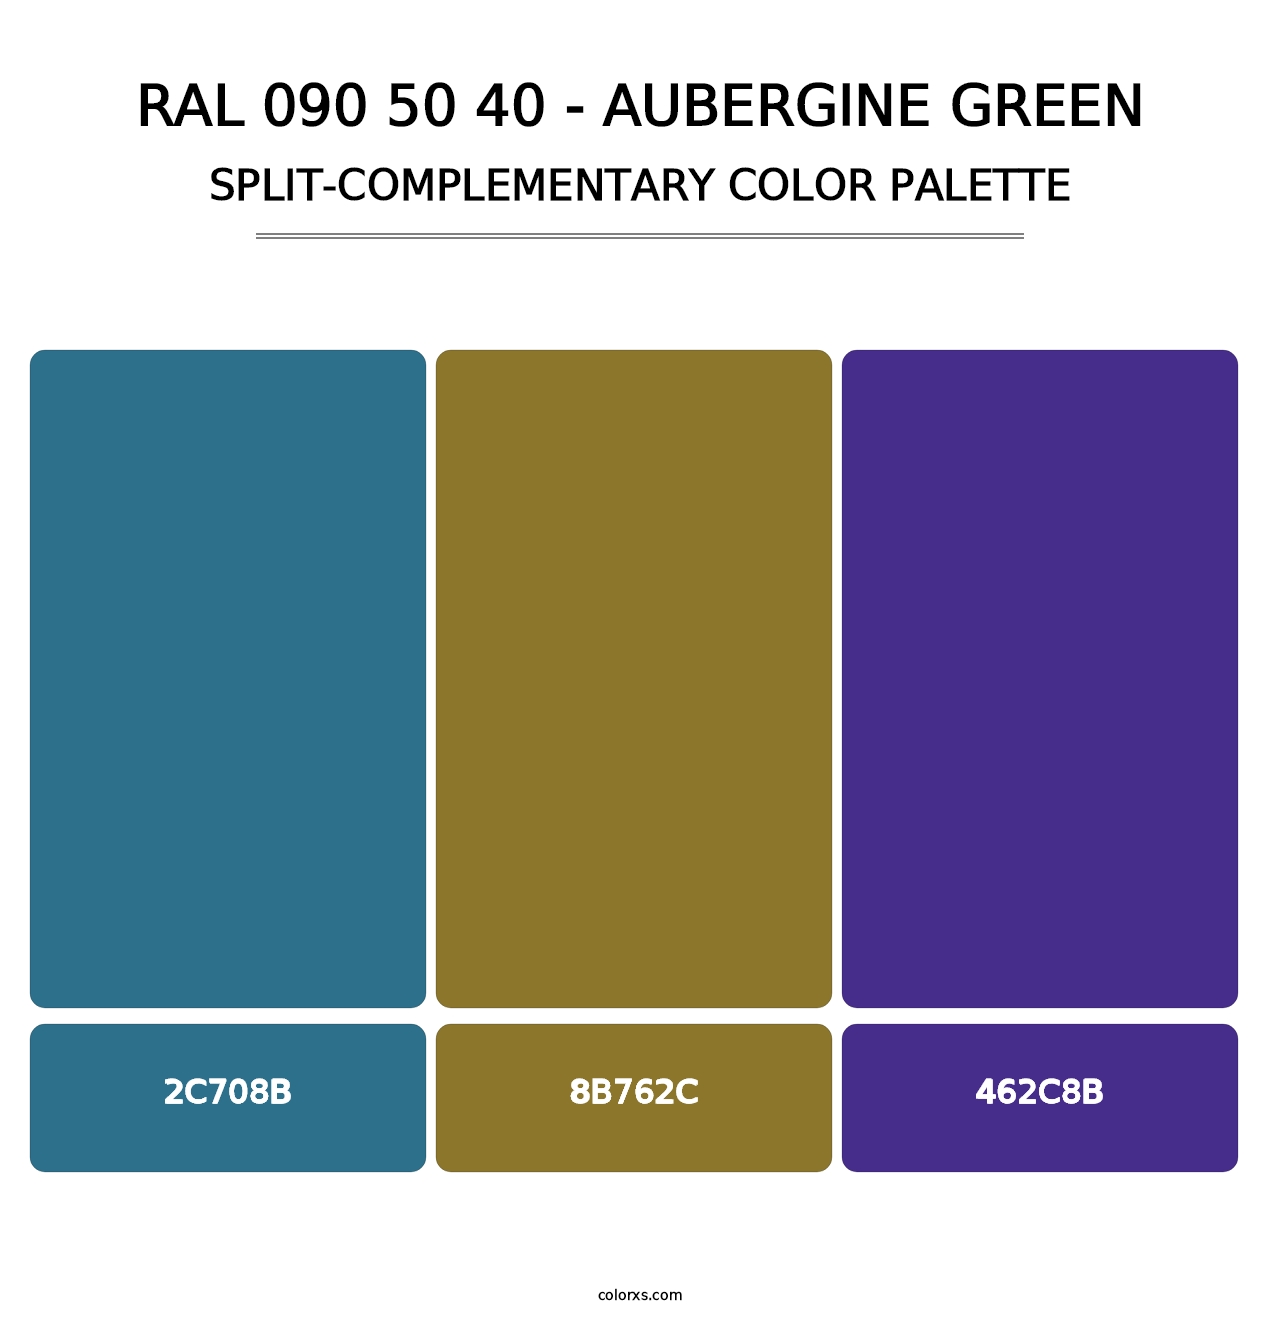 RAL 090 50 40 - Aubergine Green - Split-Complementary Color Palette